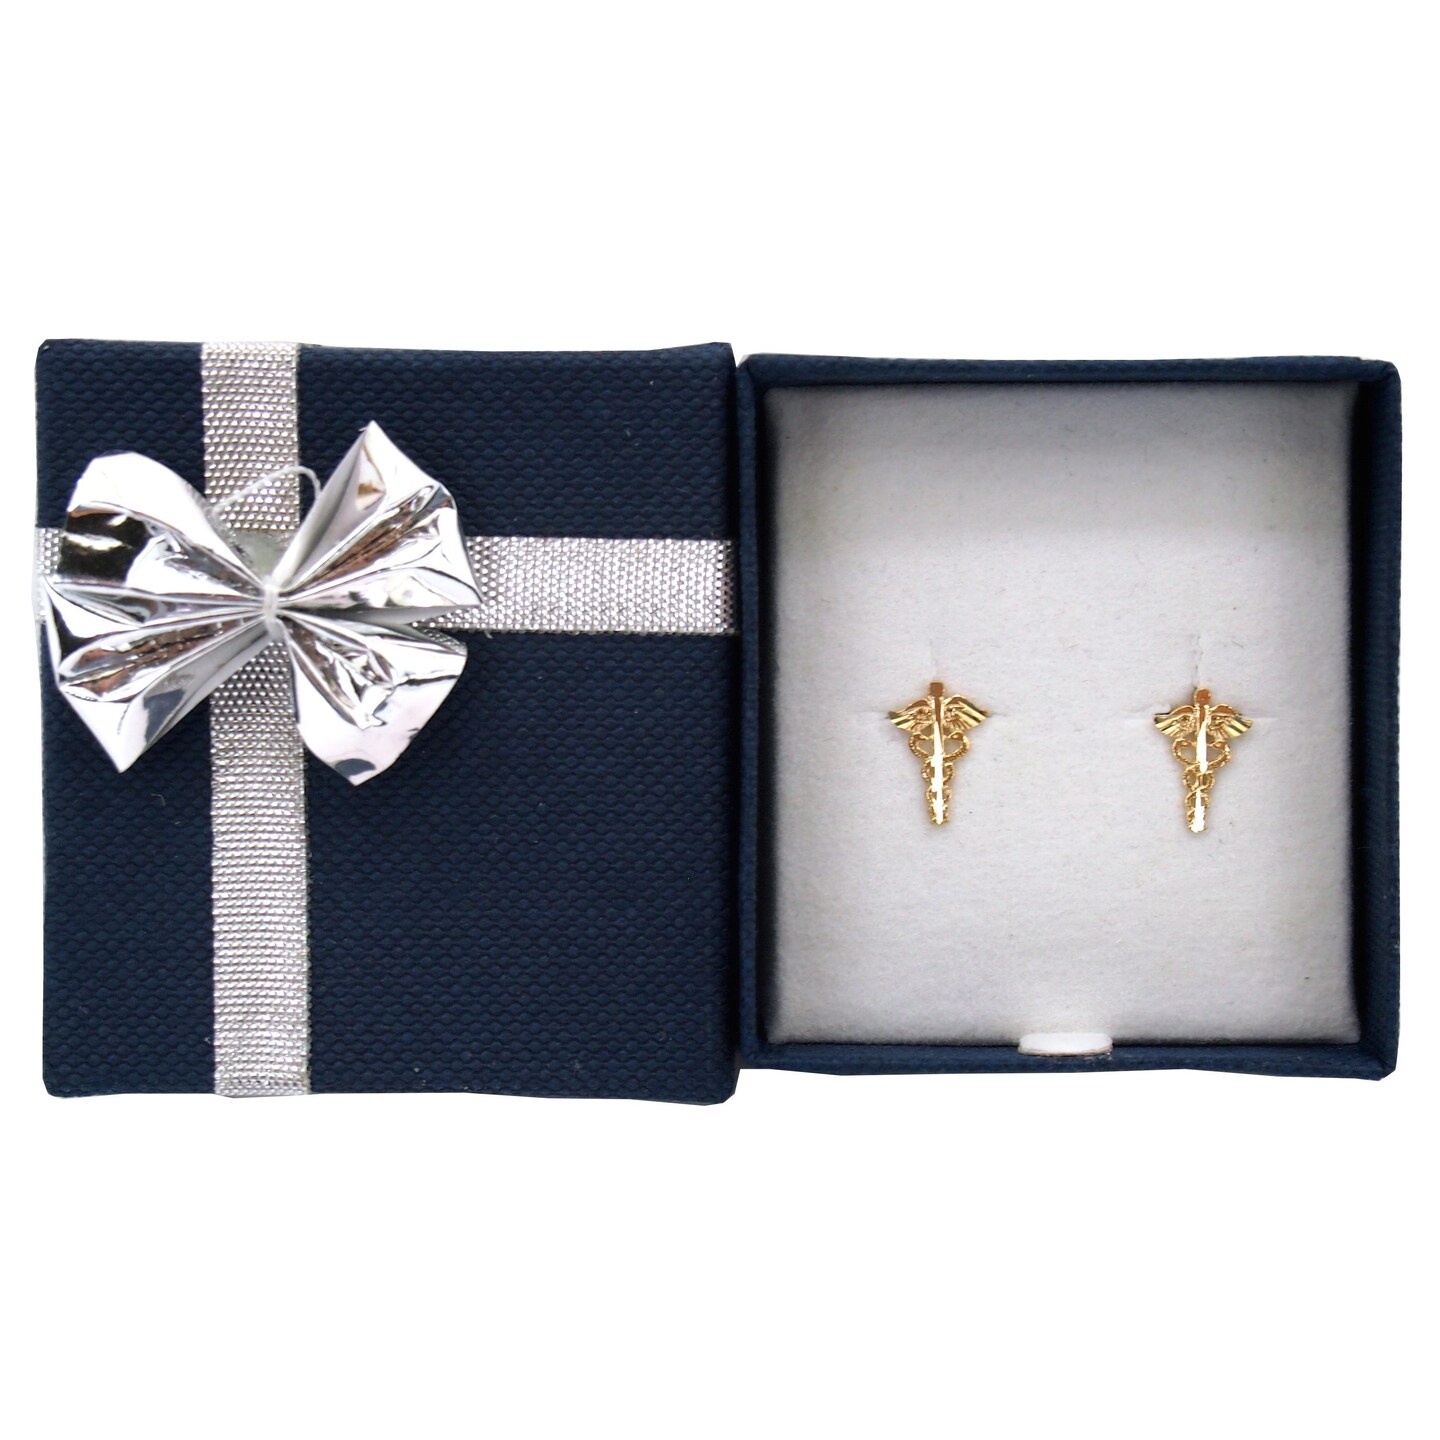 14K Yellow Gold Caduceus Stud Earrings with Bow Tie Jewelry Gift Box 